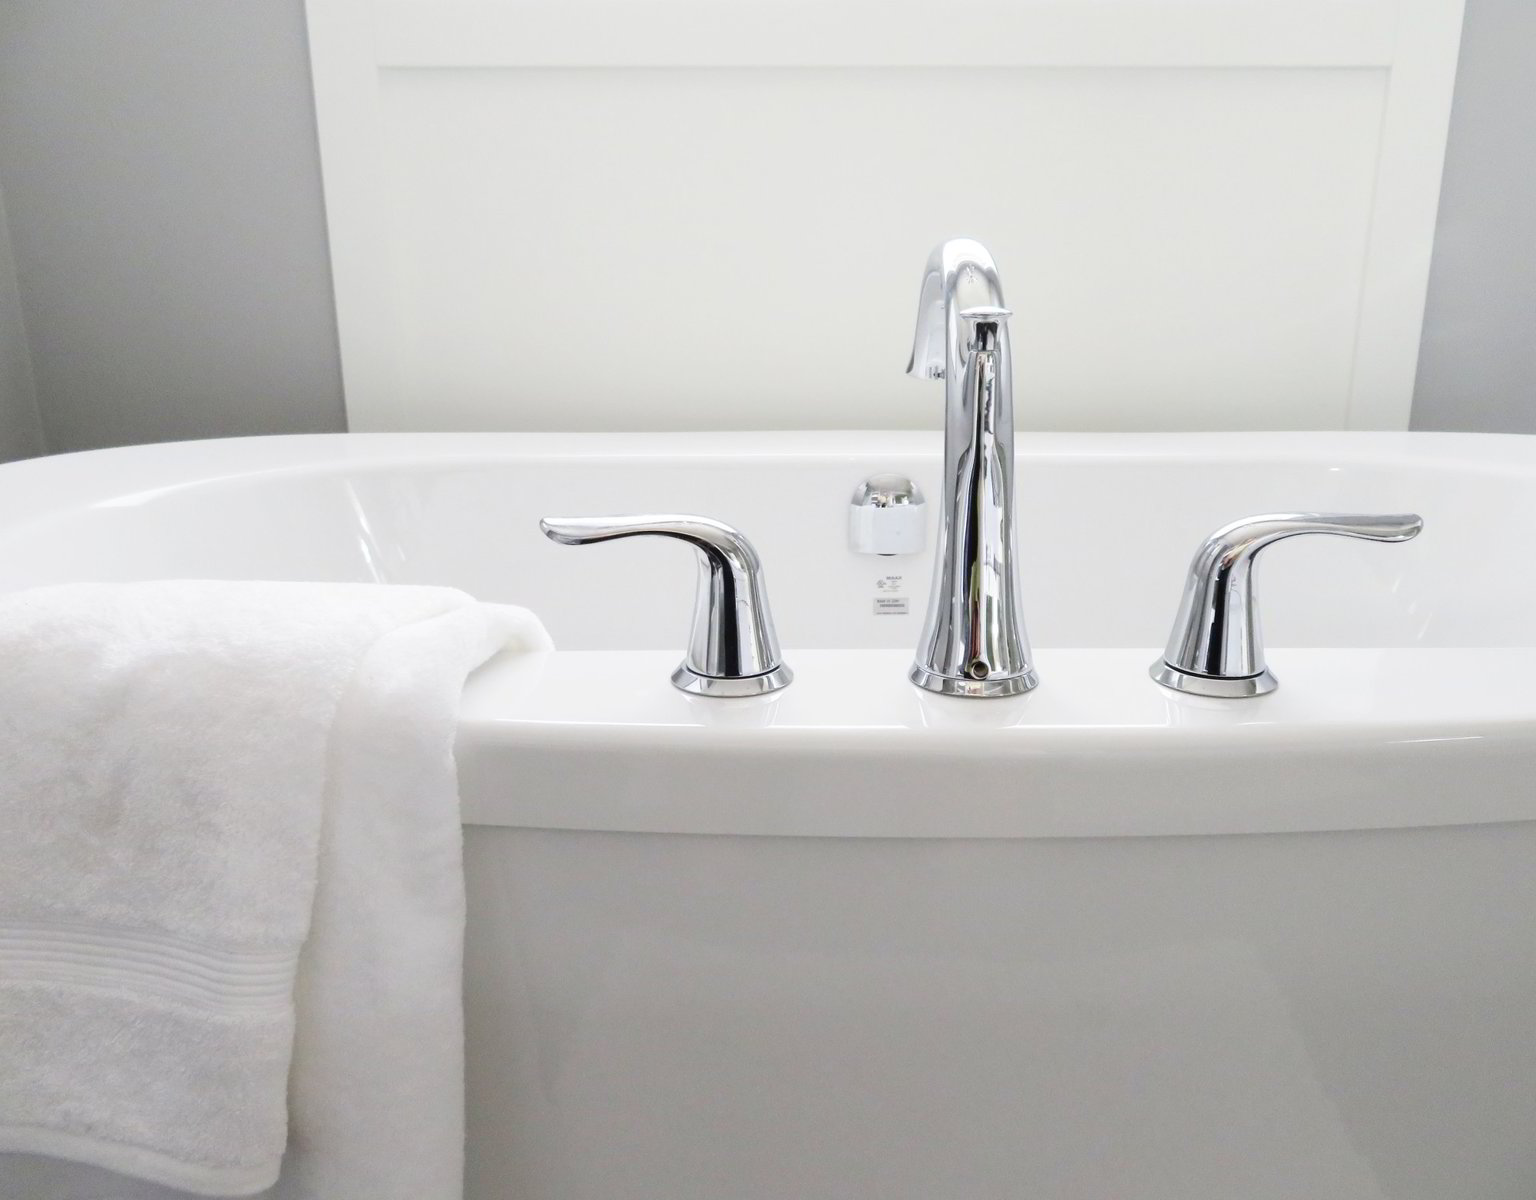 How To Fix A Leaky Bathtub Faucet, Water Leak In Bathtub Faucet